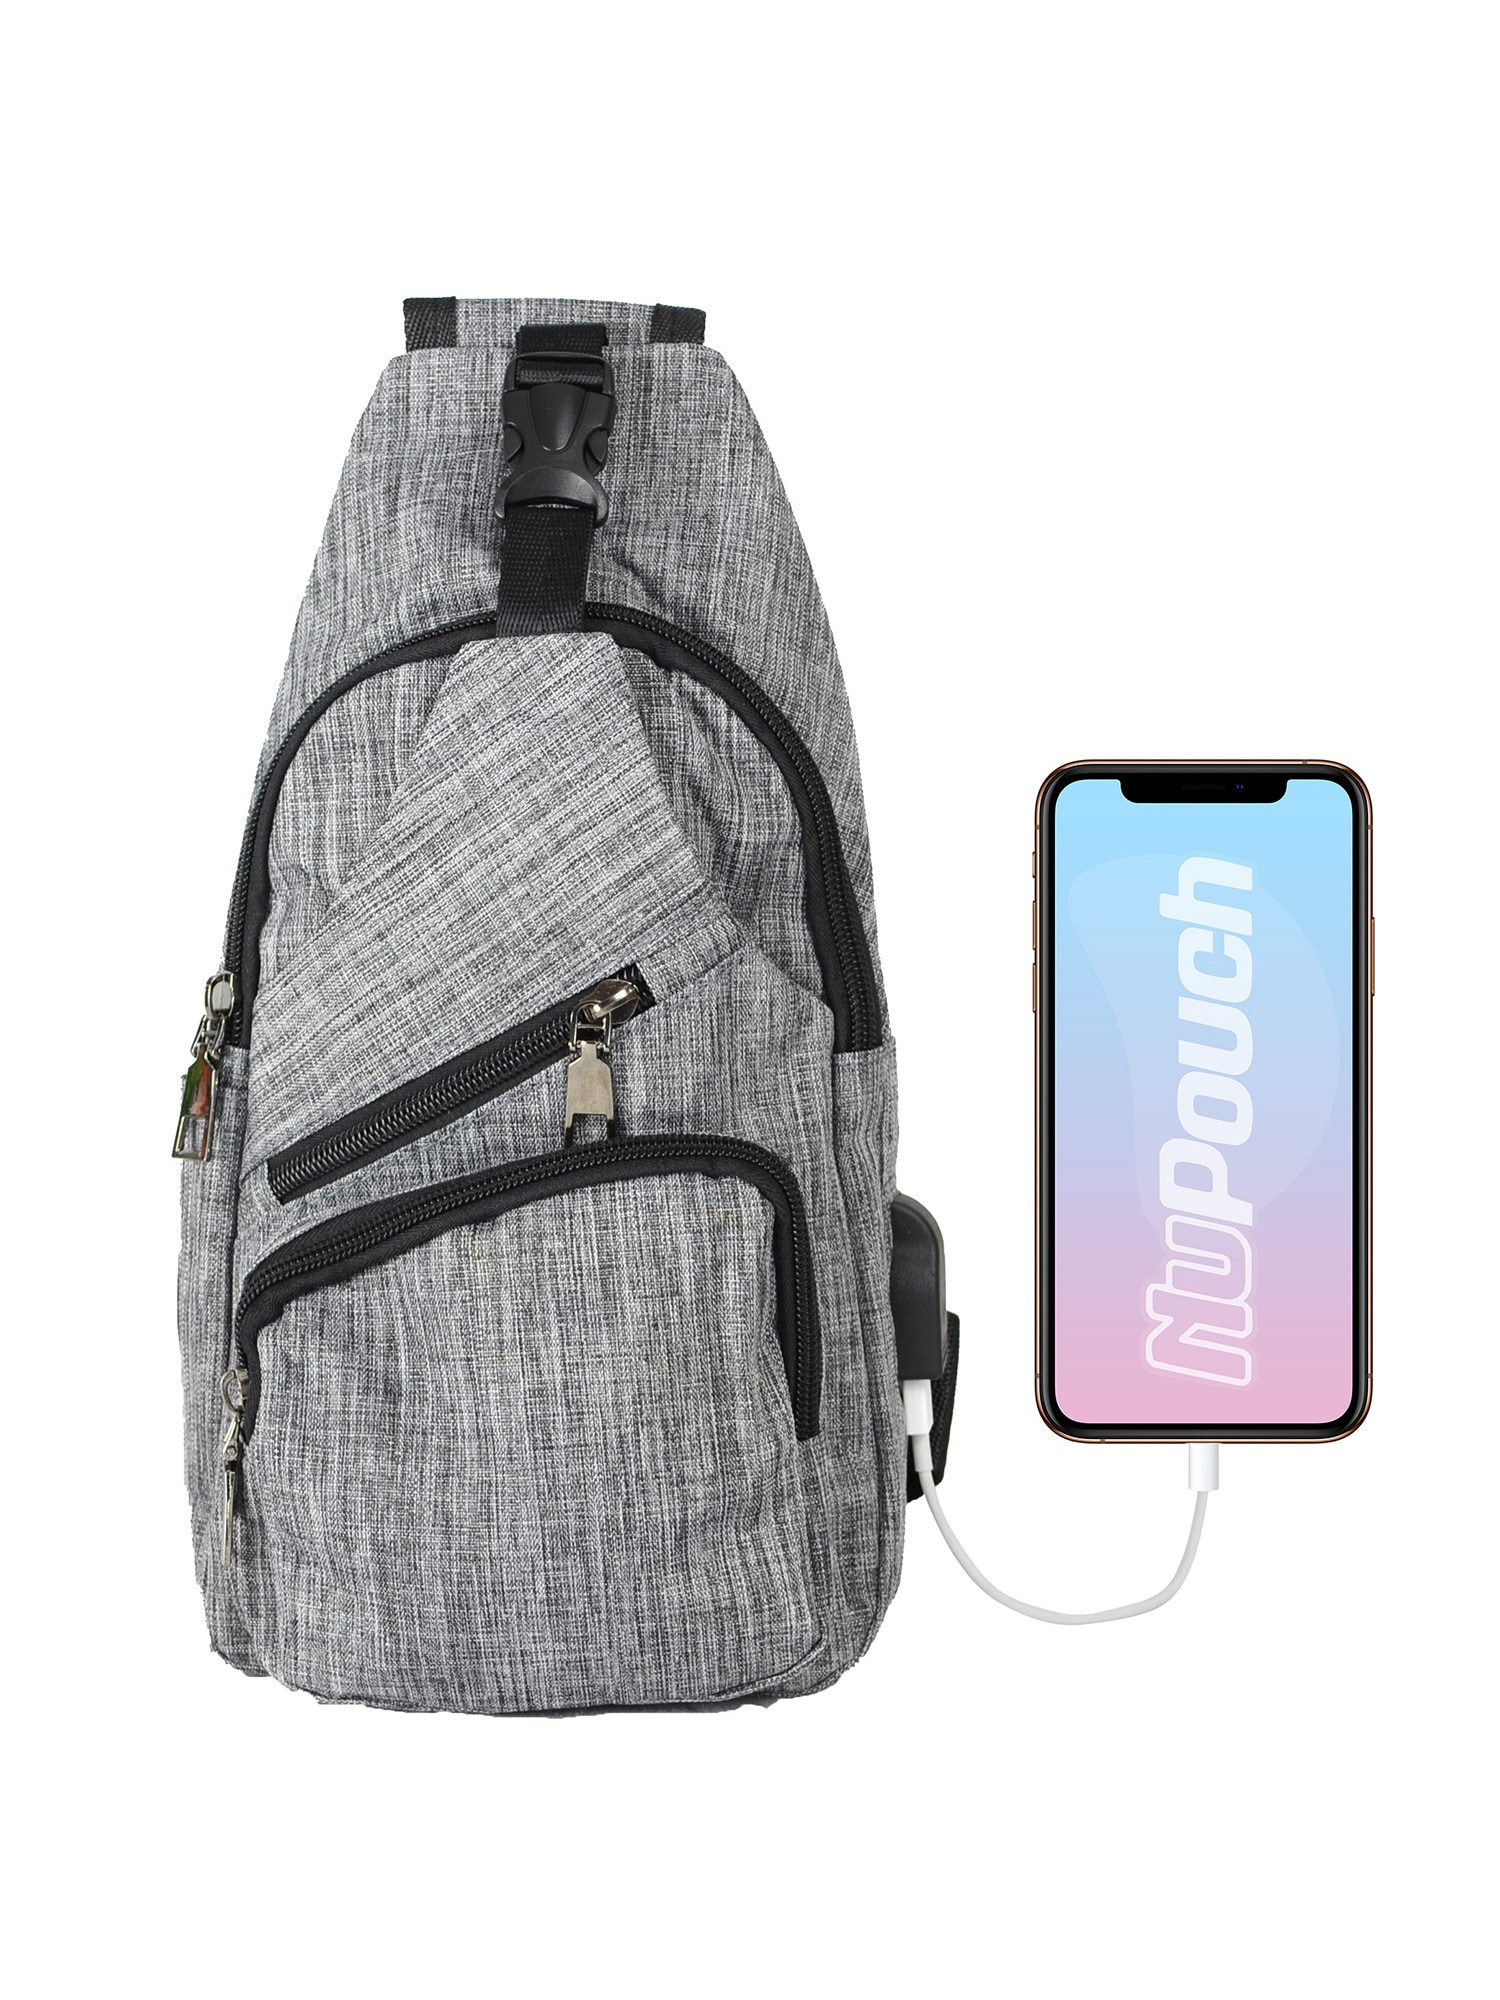 NuPouch Women's Anti-Theft Day Pack Shoulder Bag Backpack with USB Cha - image 1 of 8